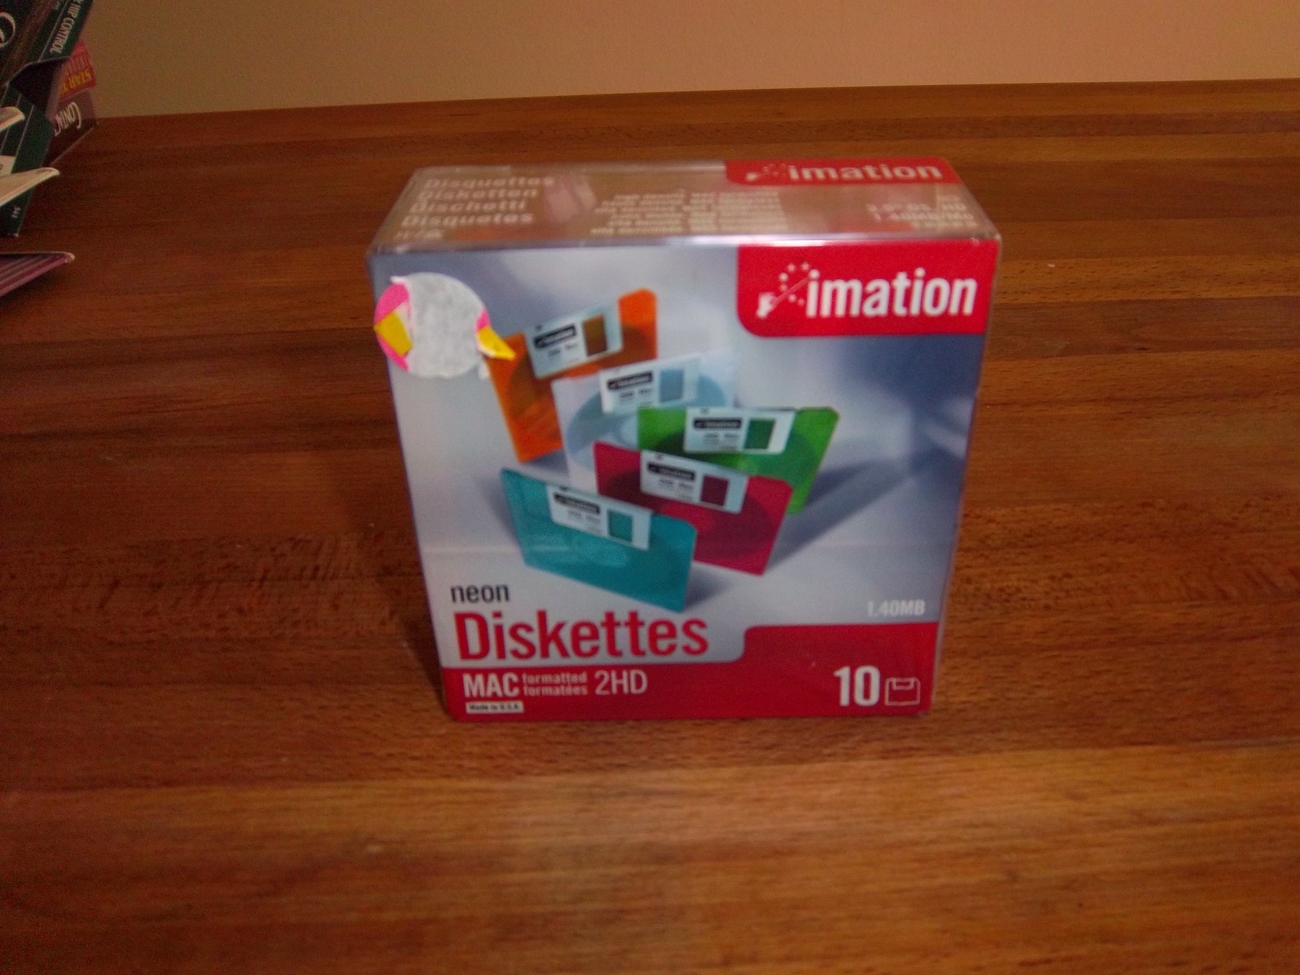 NEW Imation Neon Diskettes Mac 2HD 1.4MB 3.5 DS, HD DISCS 10 FLOPPY DISCS - $7.99